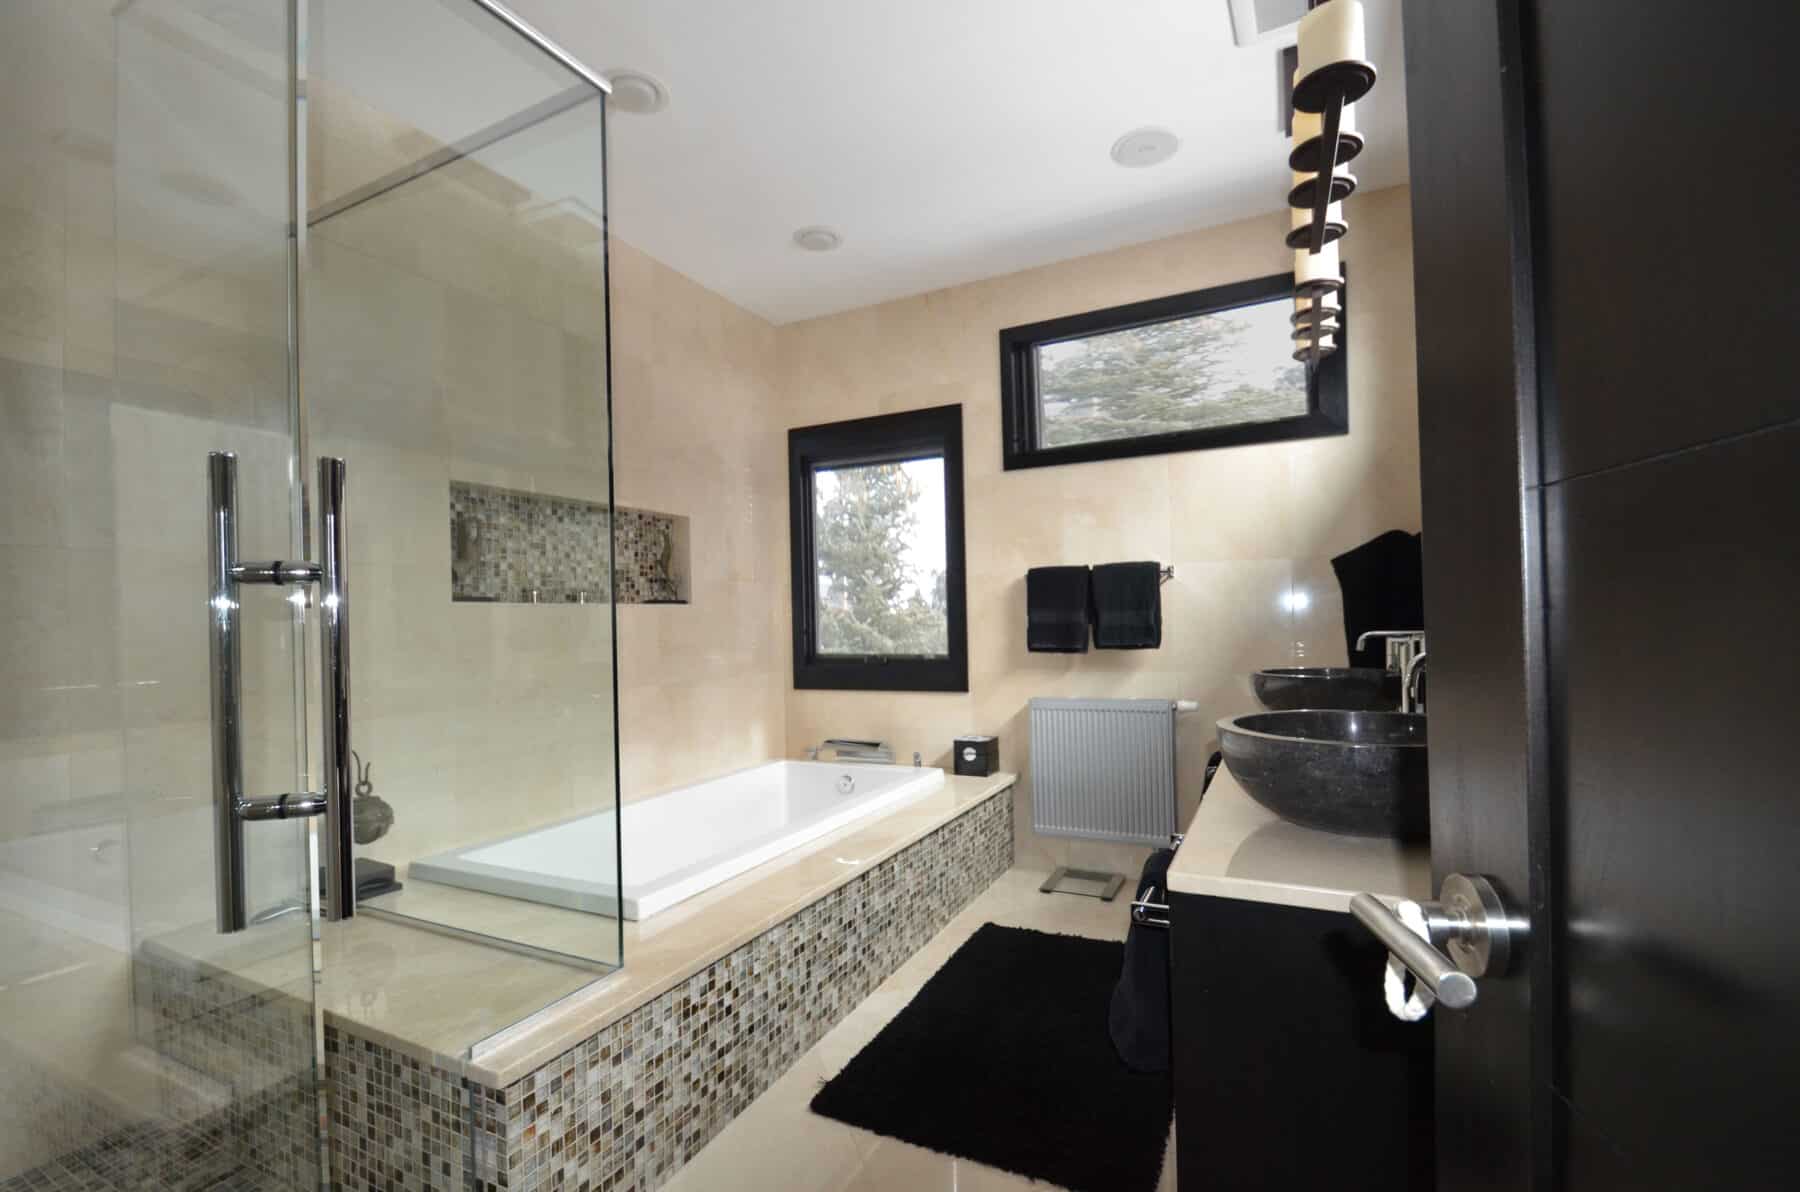 Modern Marble and Mosaic Mater Bathroom with Tub and Glass Shower in Aspen, Colorado Custom Home. Luxury Home Building Interiors